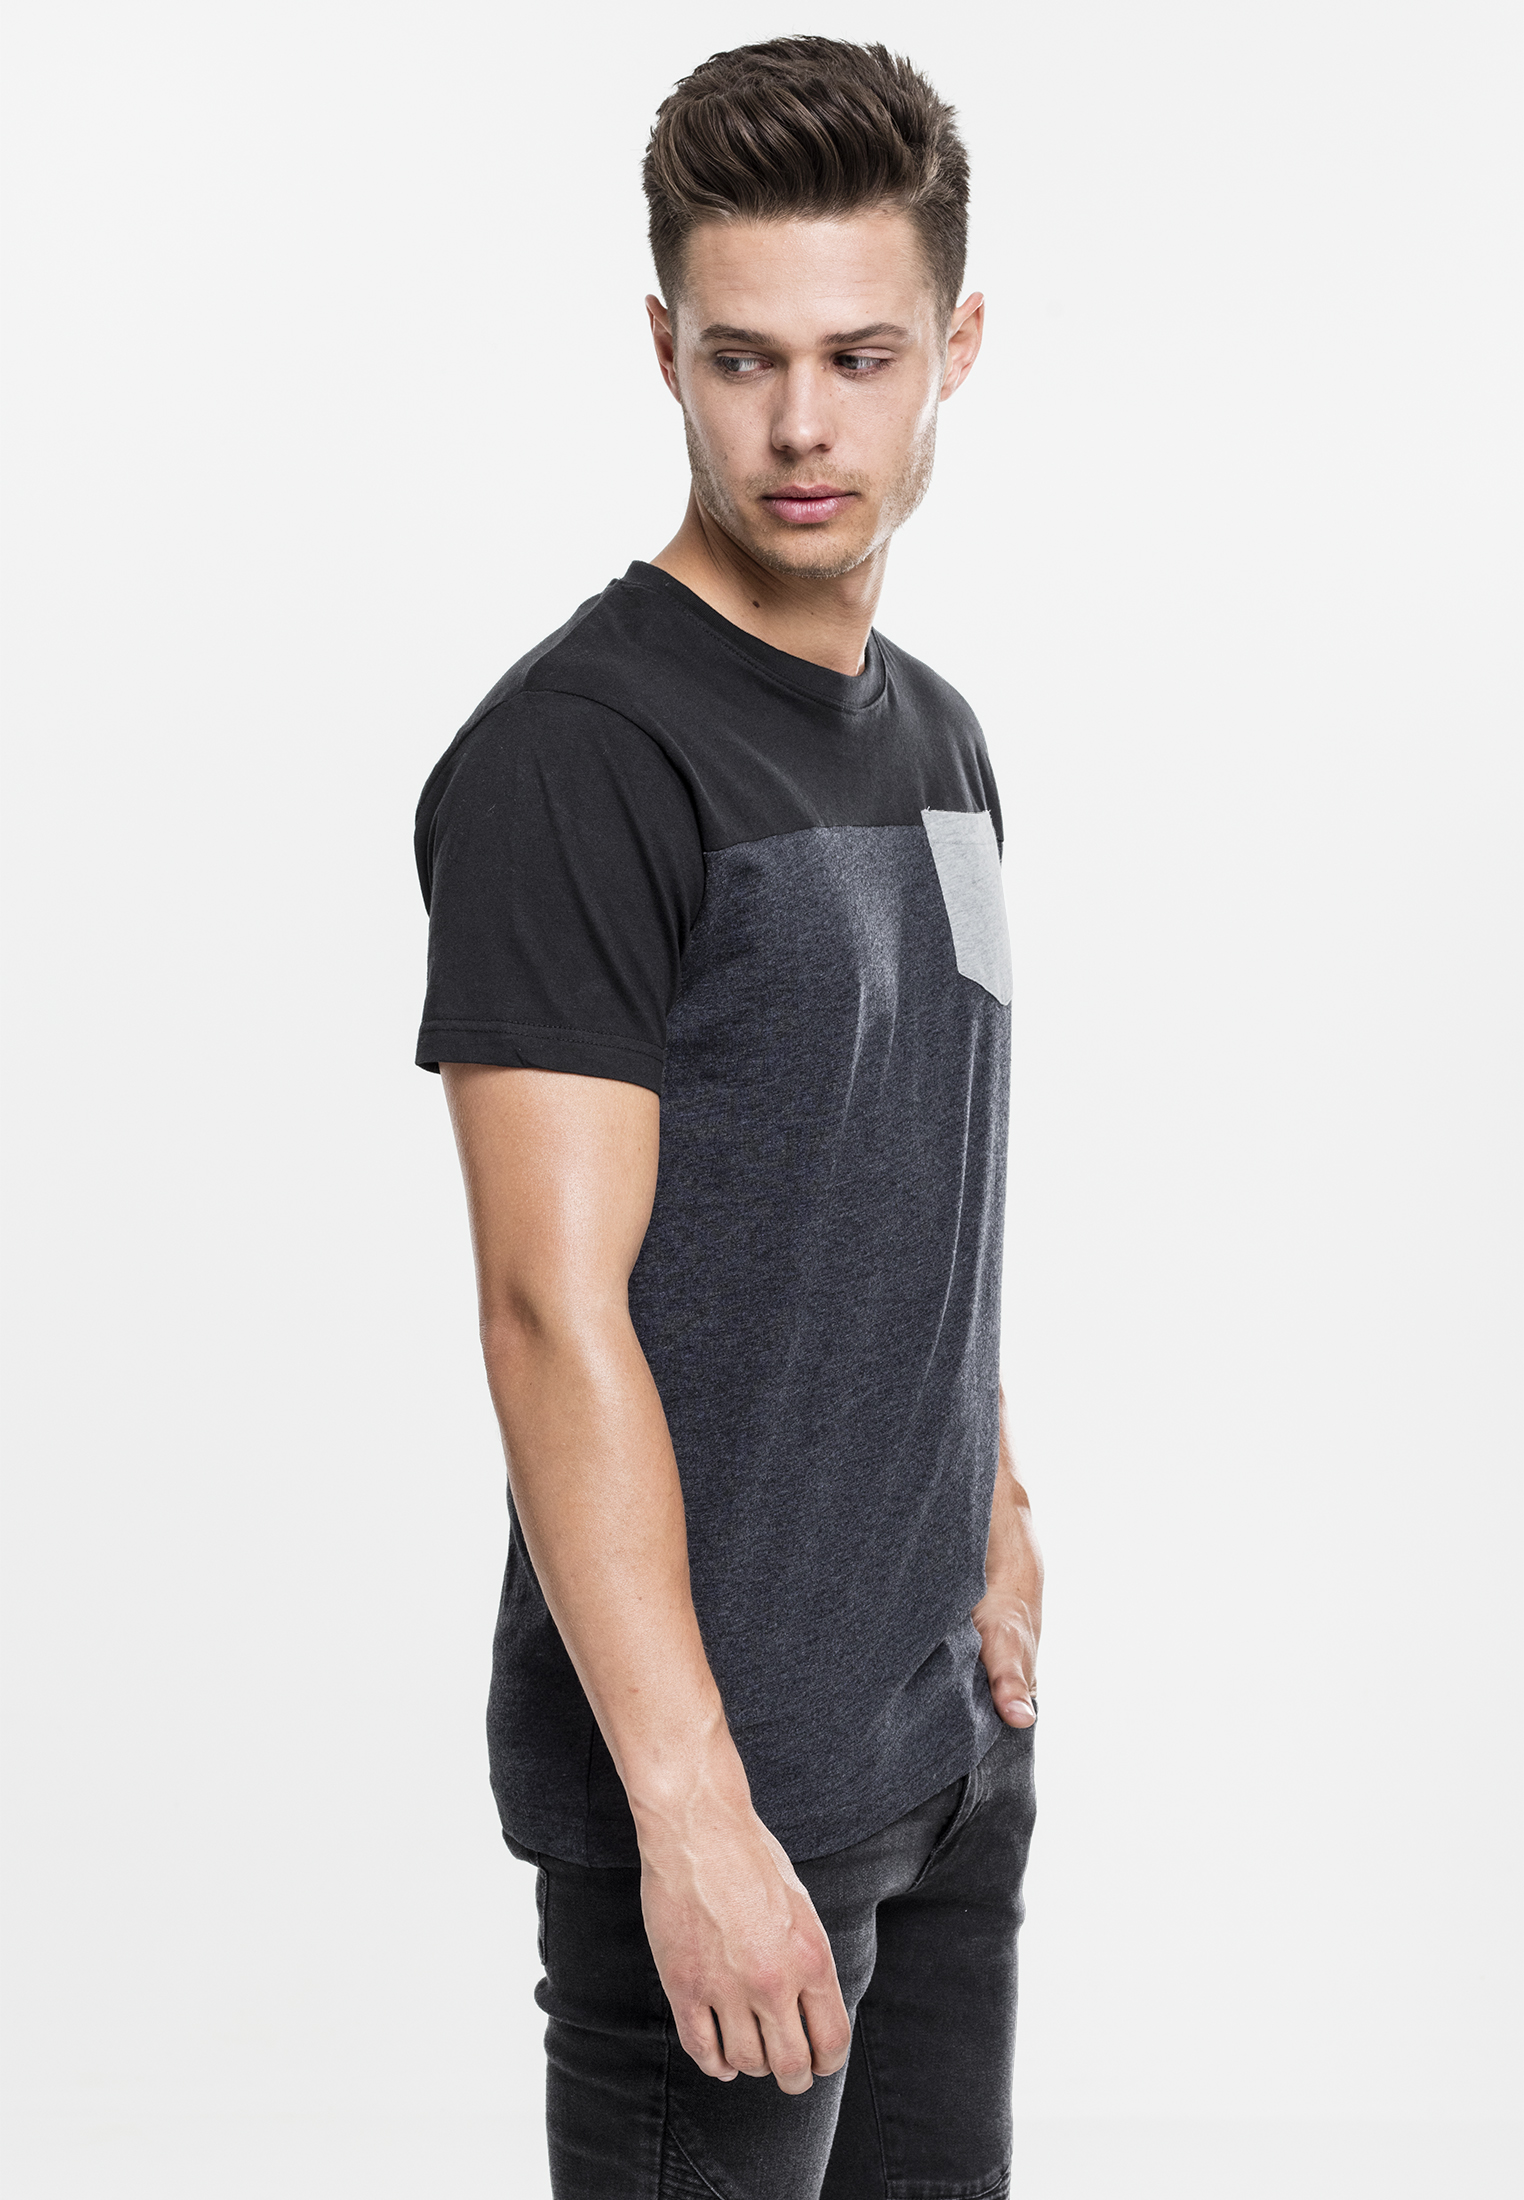 T-Shirts 3-Tone Pocket Tee in Farbe cha/blk/gry